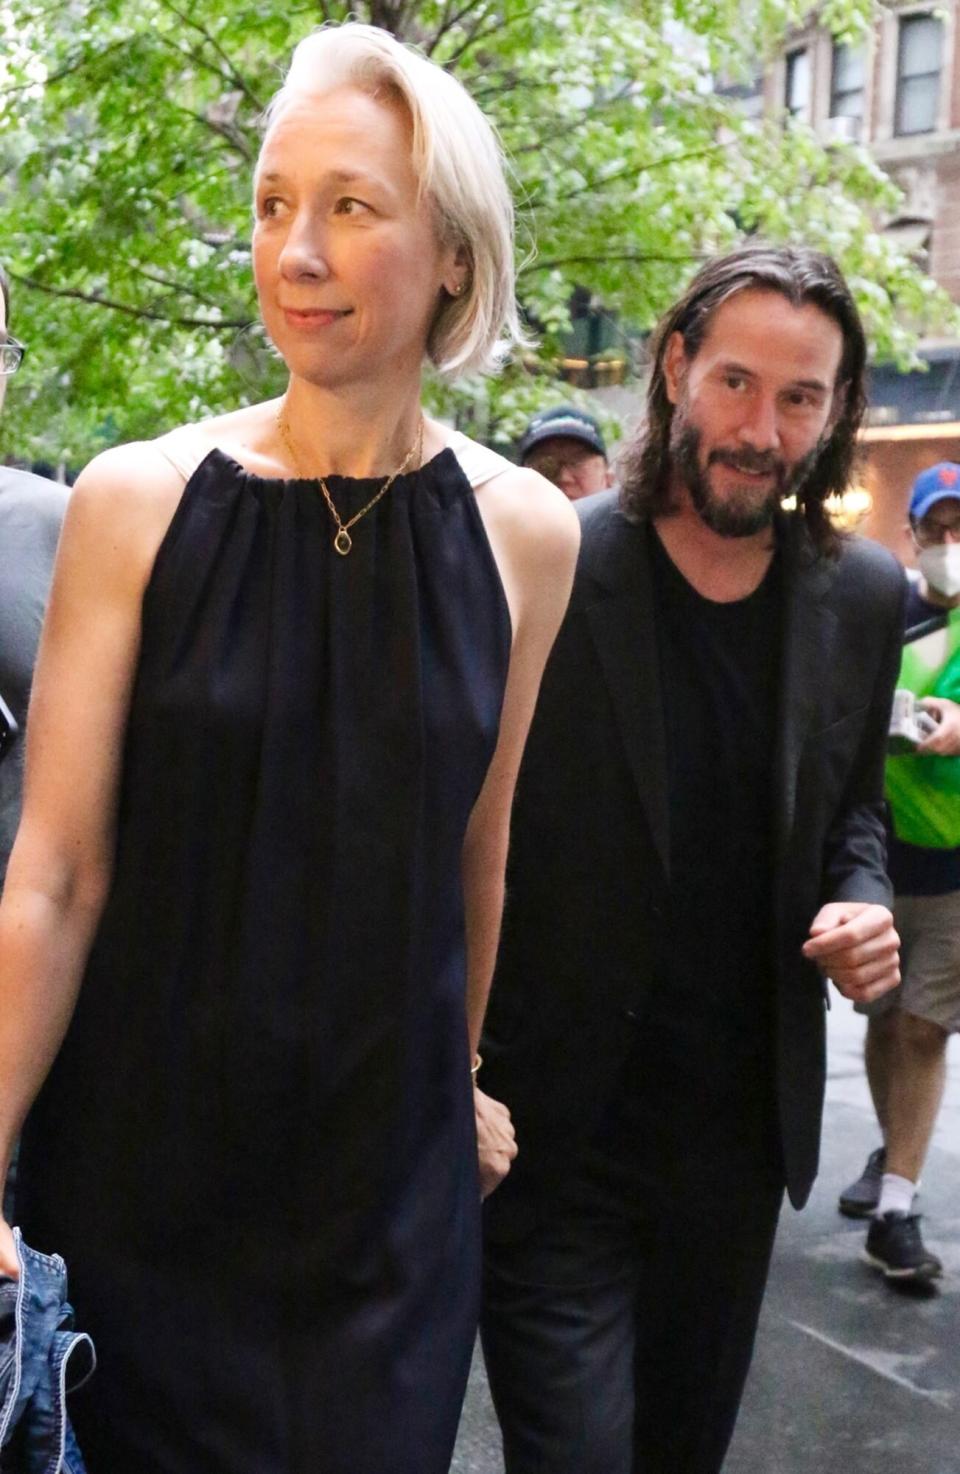 Keanu Reeves and girlfriend Alexandra Grant arrive to see a performance of the Broadway Show “American Buffalo”